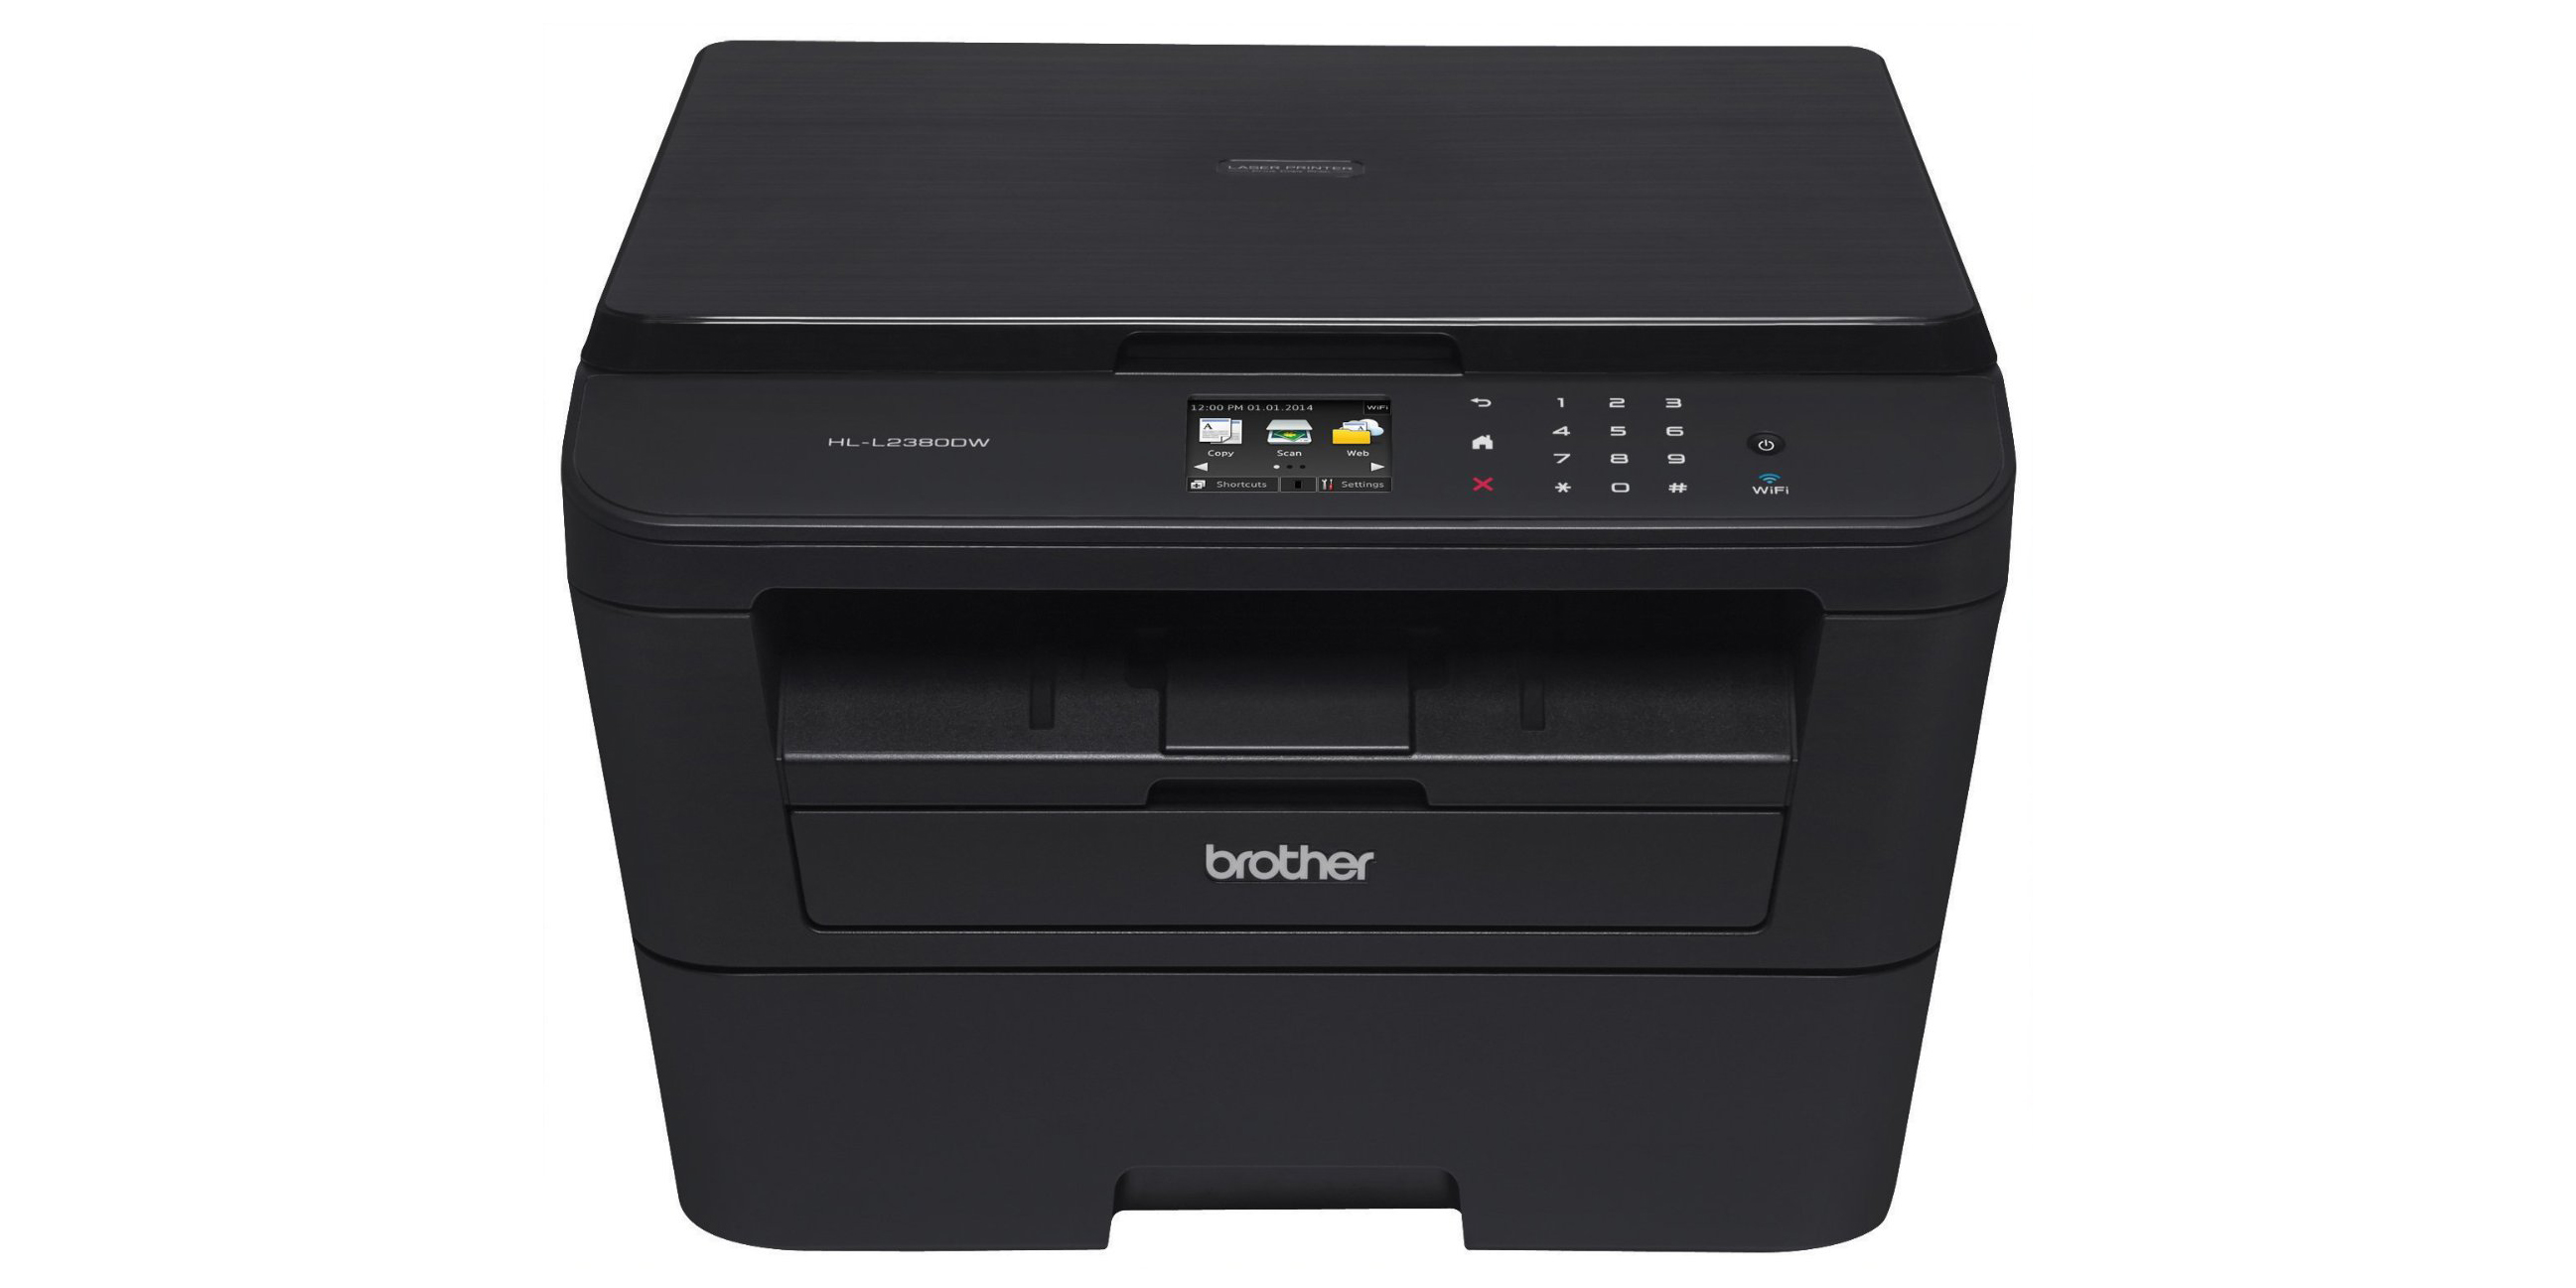 brother printer hl2270dw stopped printing after new router installed